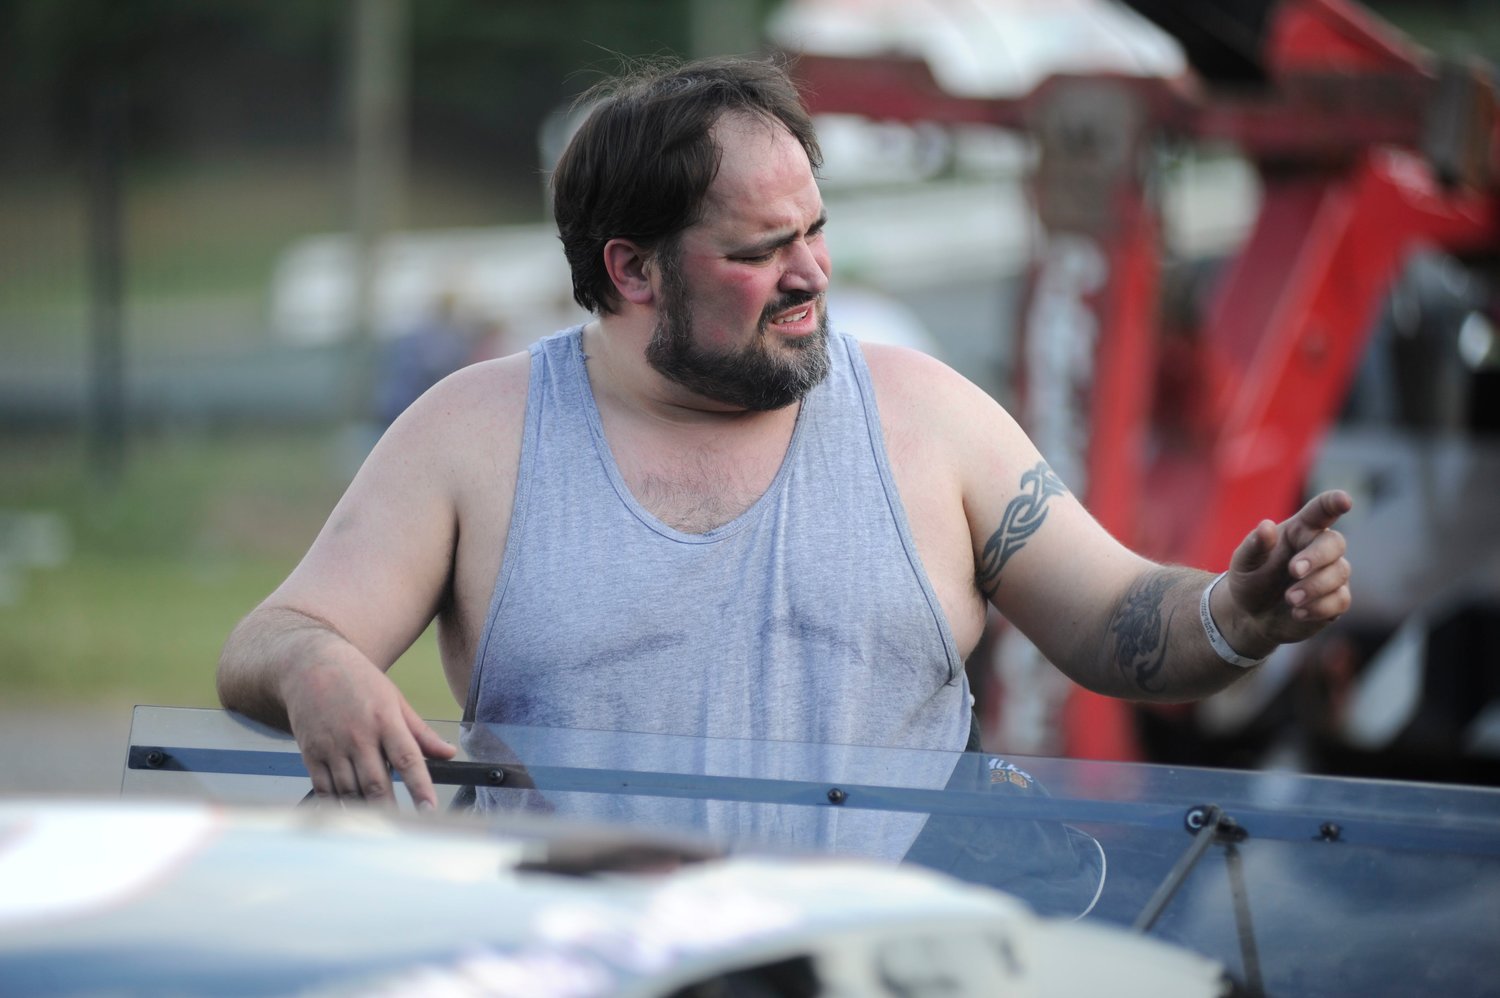 Taking a break. Mike Dutka relaxes after a few practices laps before the start of Bethel Motor Speedway’s racing season on Saturday, June 20.